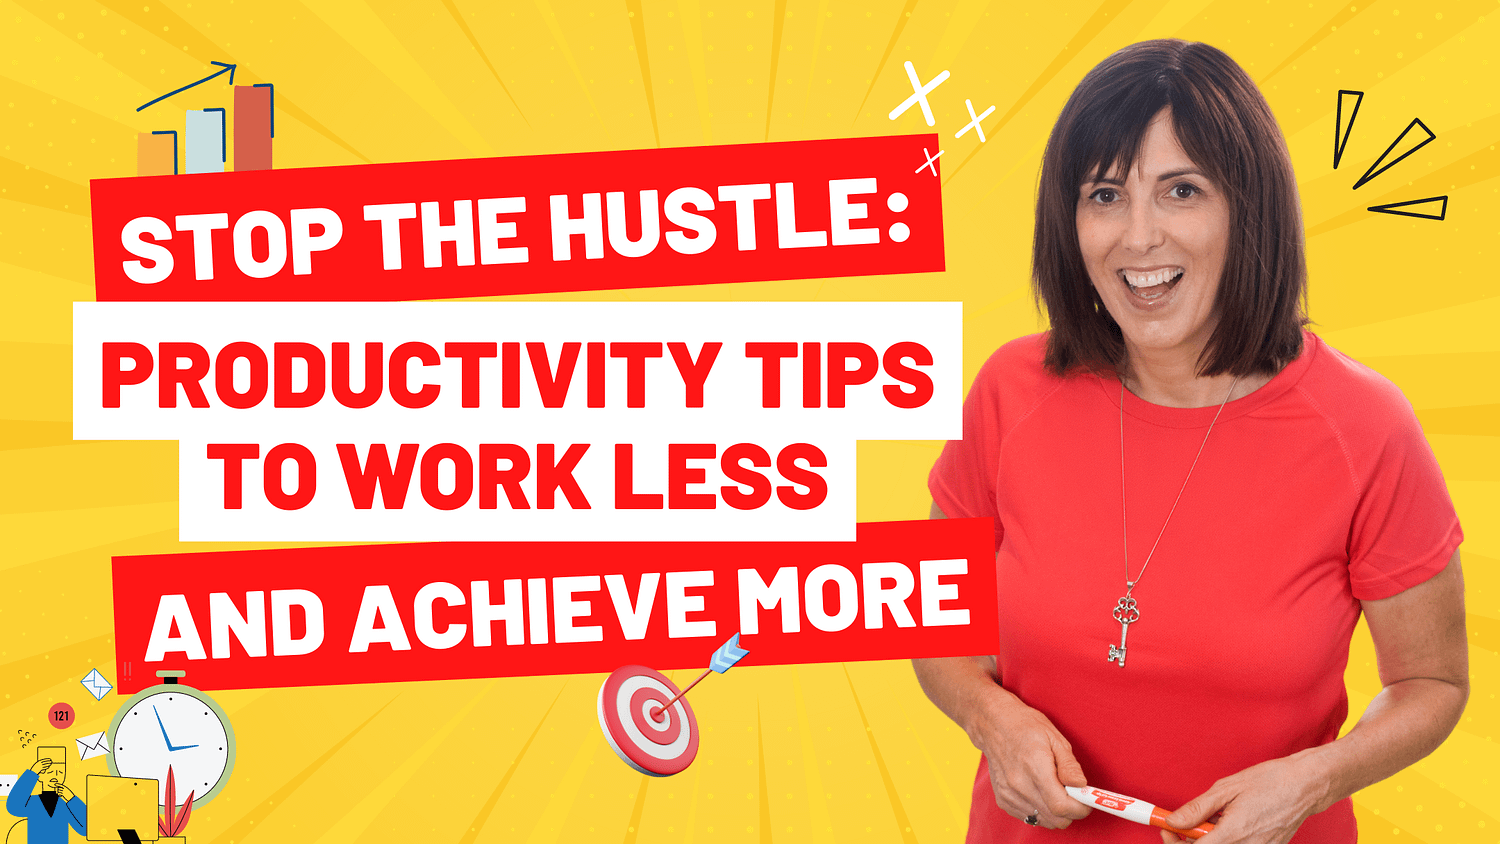 Stop the Hustle: Productivity Tips to Work Less and Achieve More